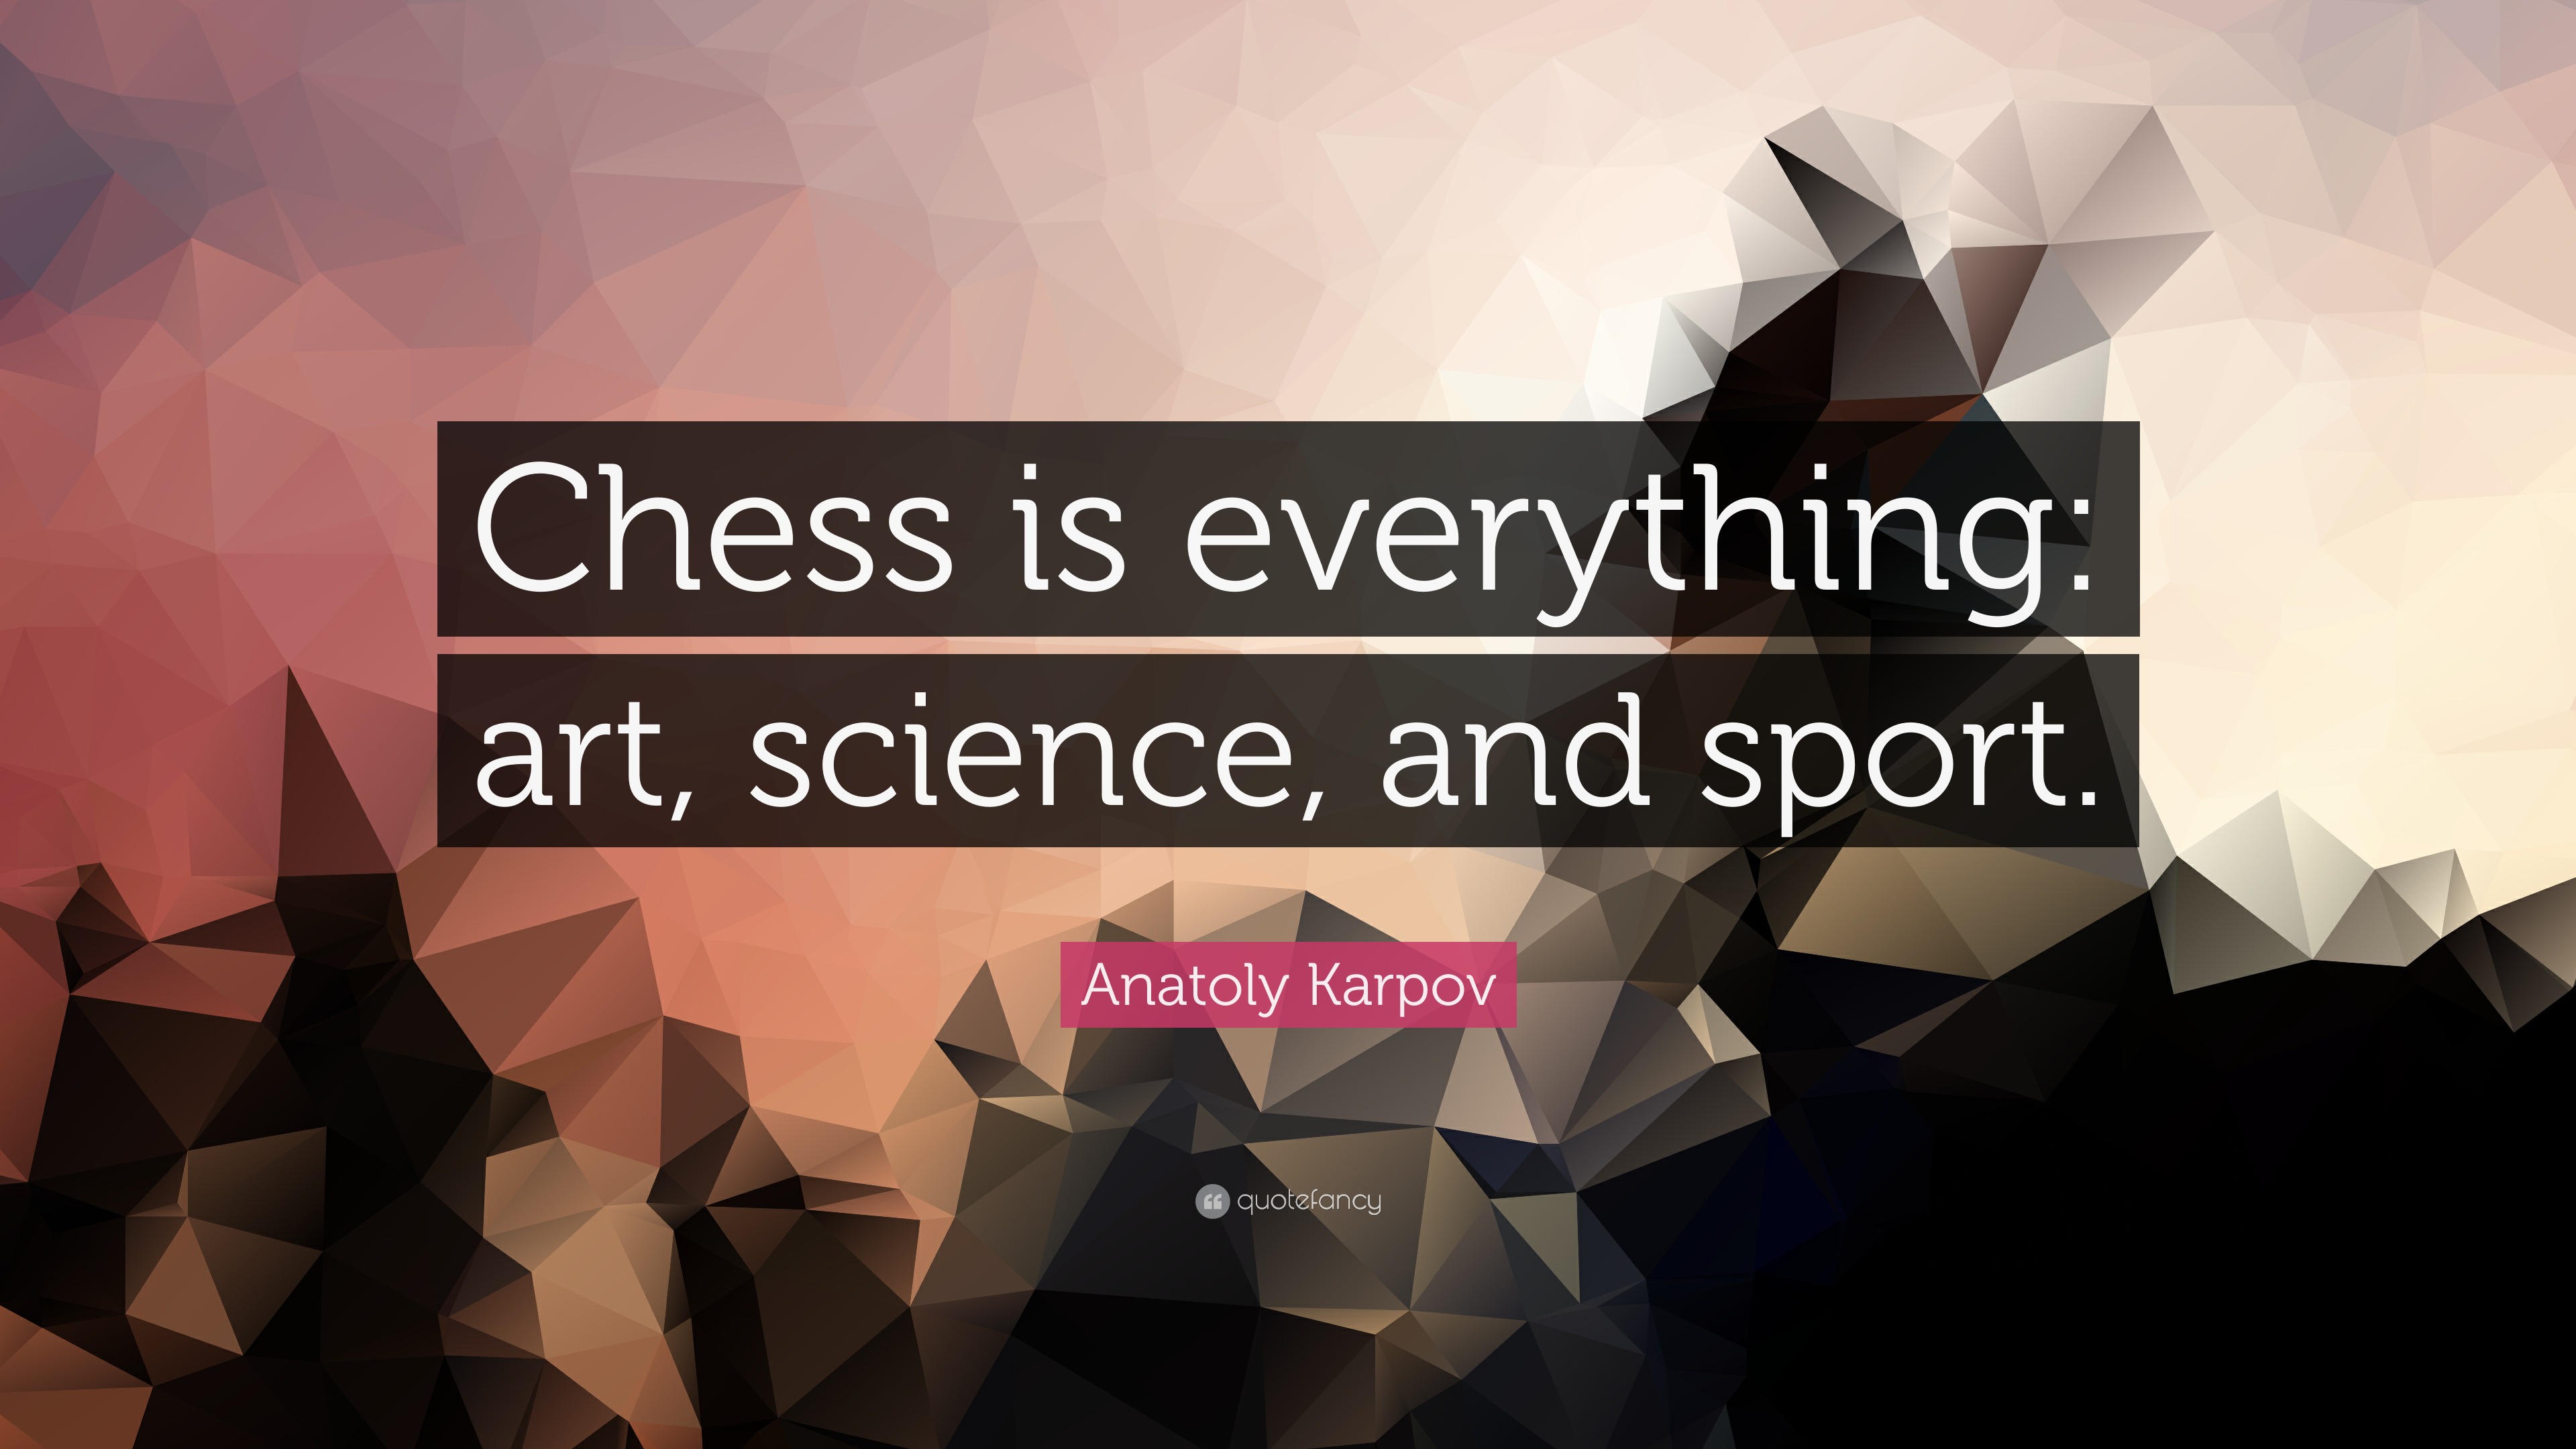 10 Things We Can All Learn from Anatoly Karpov - TheChessWorld